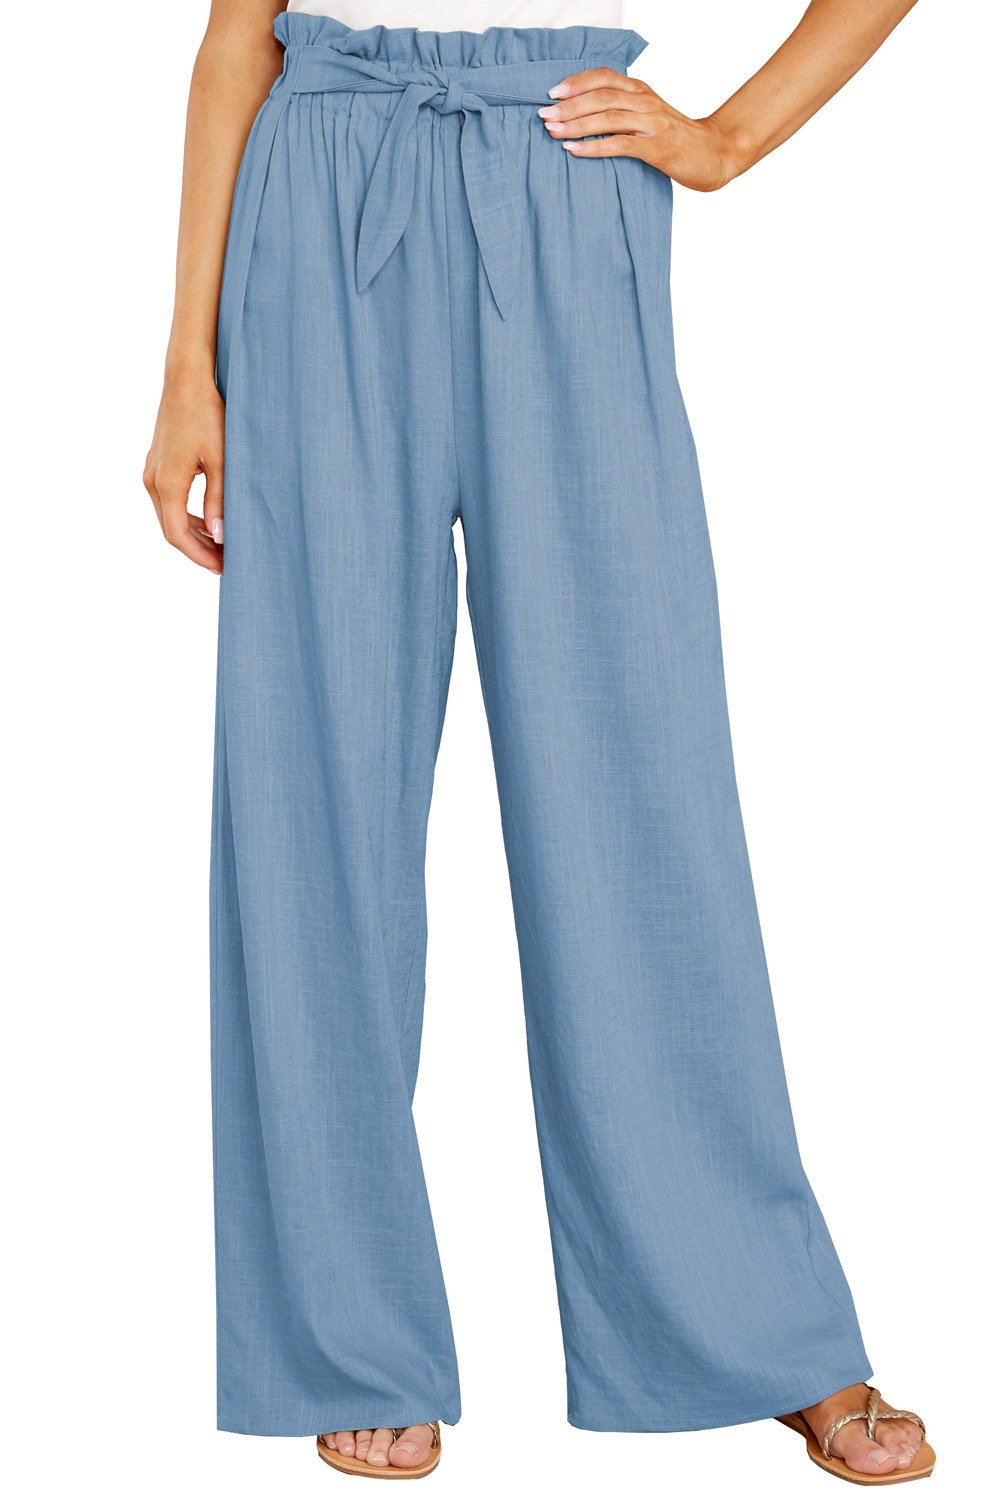 Casual Women Linen Long Pants-Light Blue-S-Free Shipping at meselling99